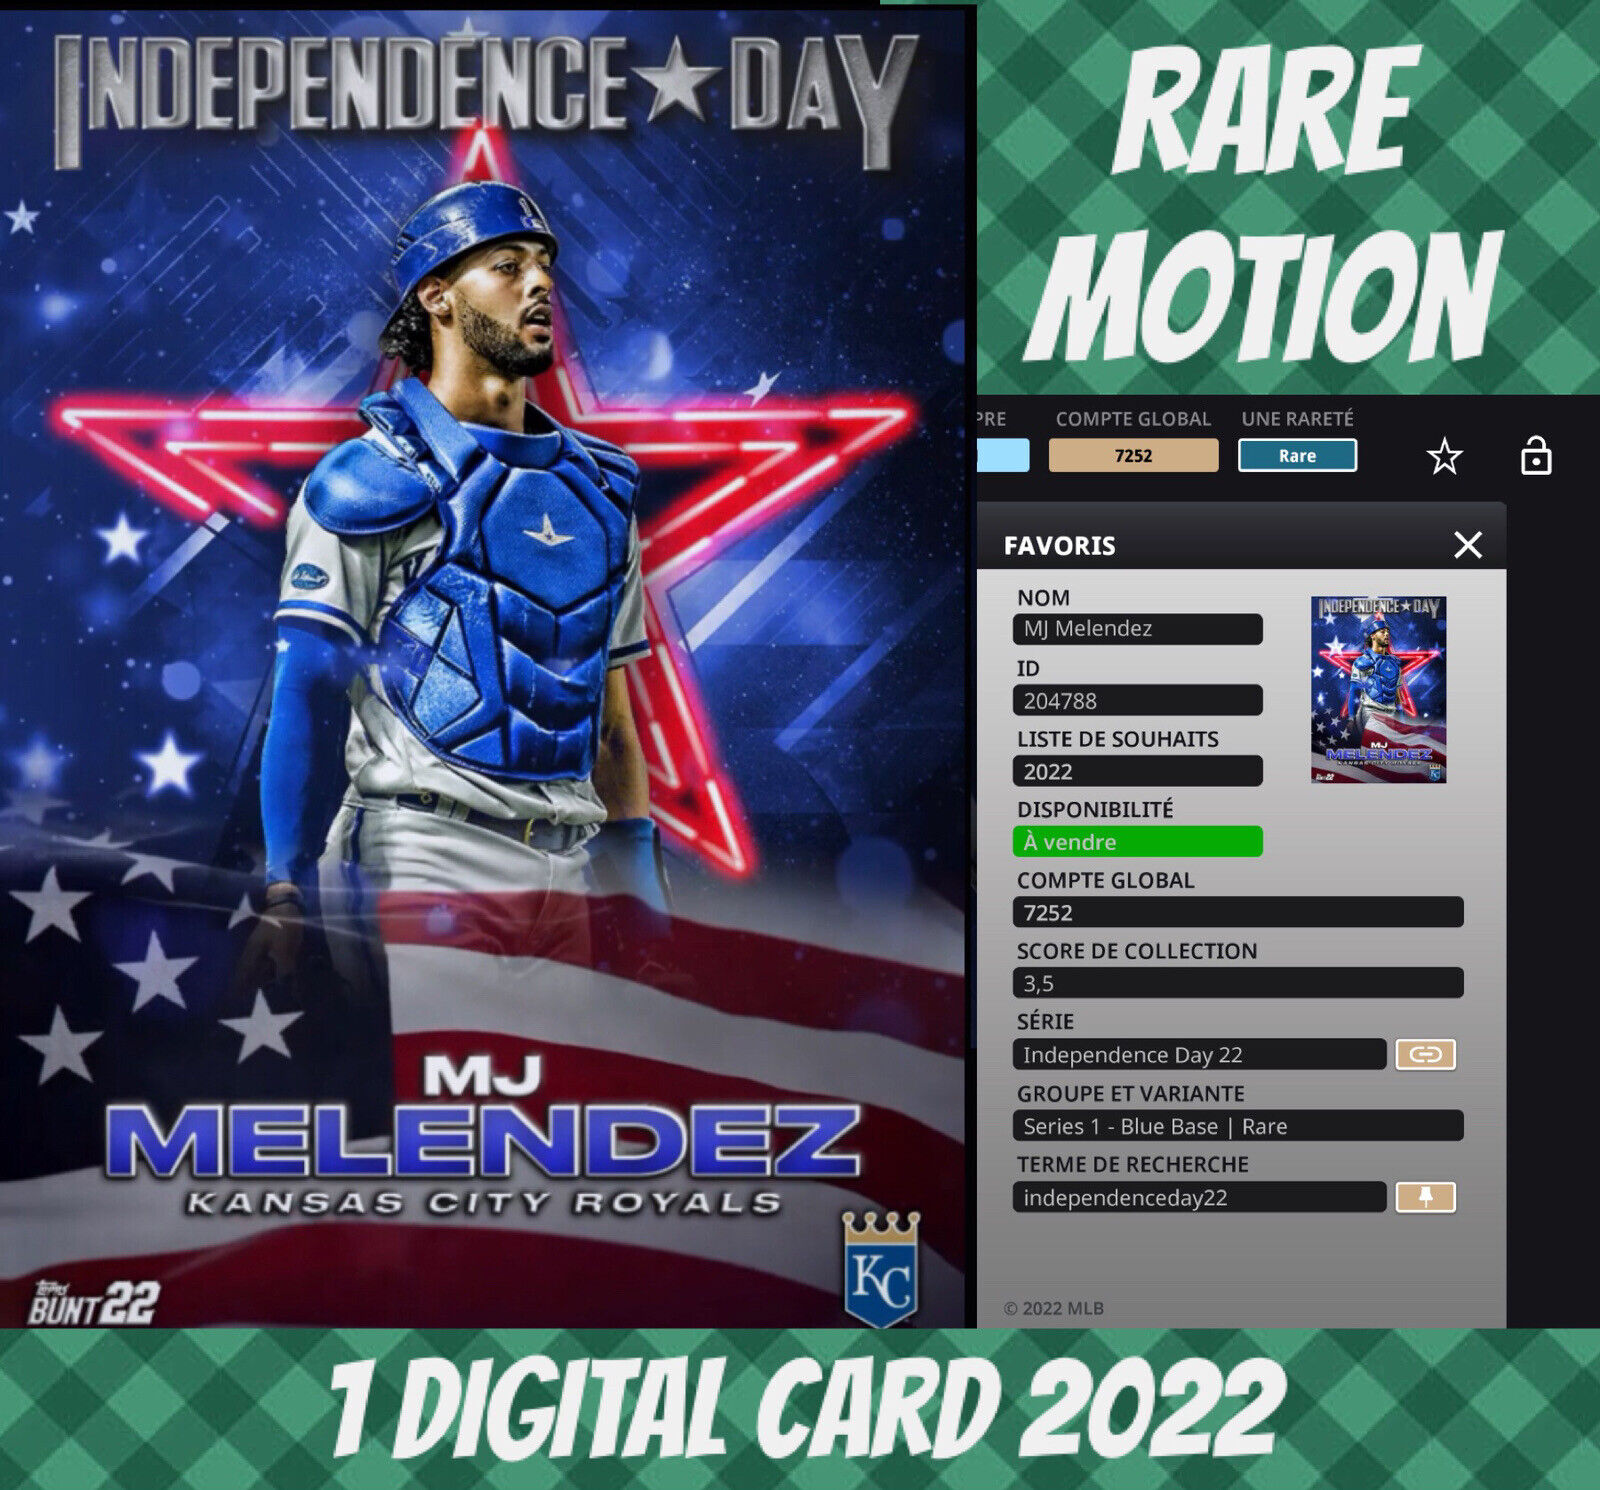 Topps Colorful Rare GM Melendez Independence Day Motion 2022 Digital